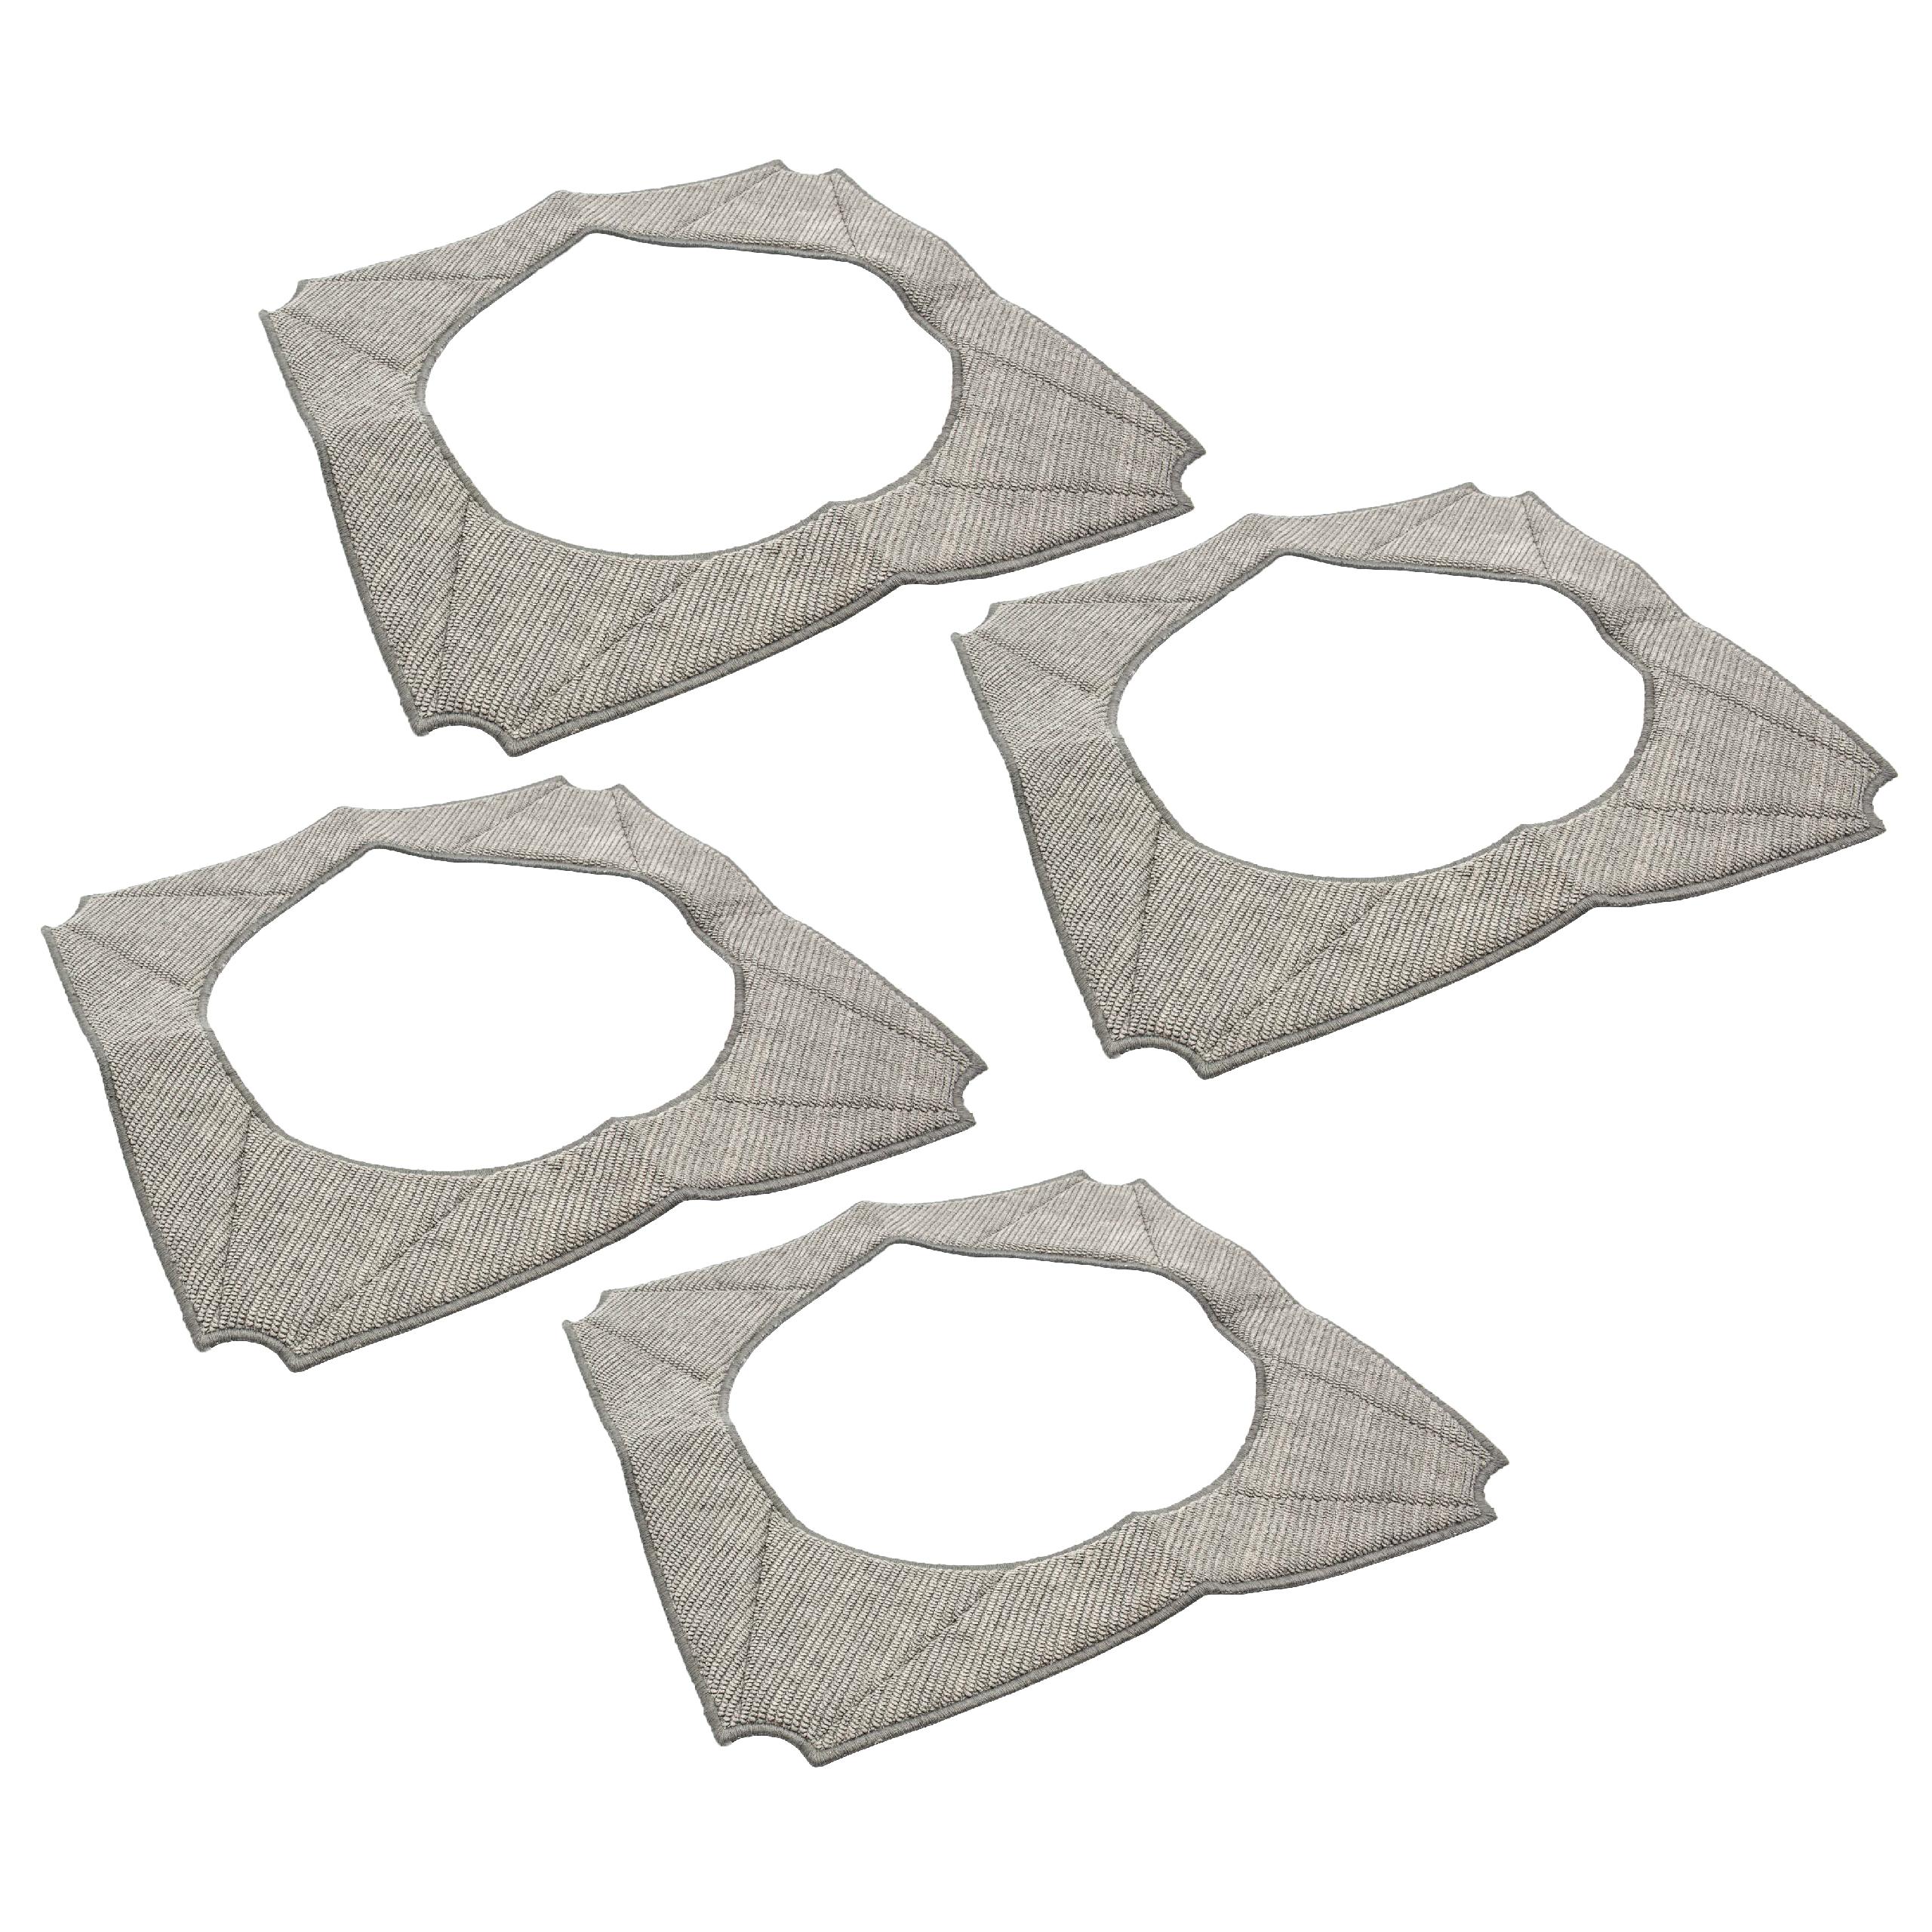  Cleaning Cloth Set (4 Part) suitable for Ecovacs Winbot W-950, W950 Window Cleaning Robot - microfibre